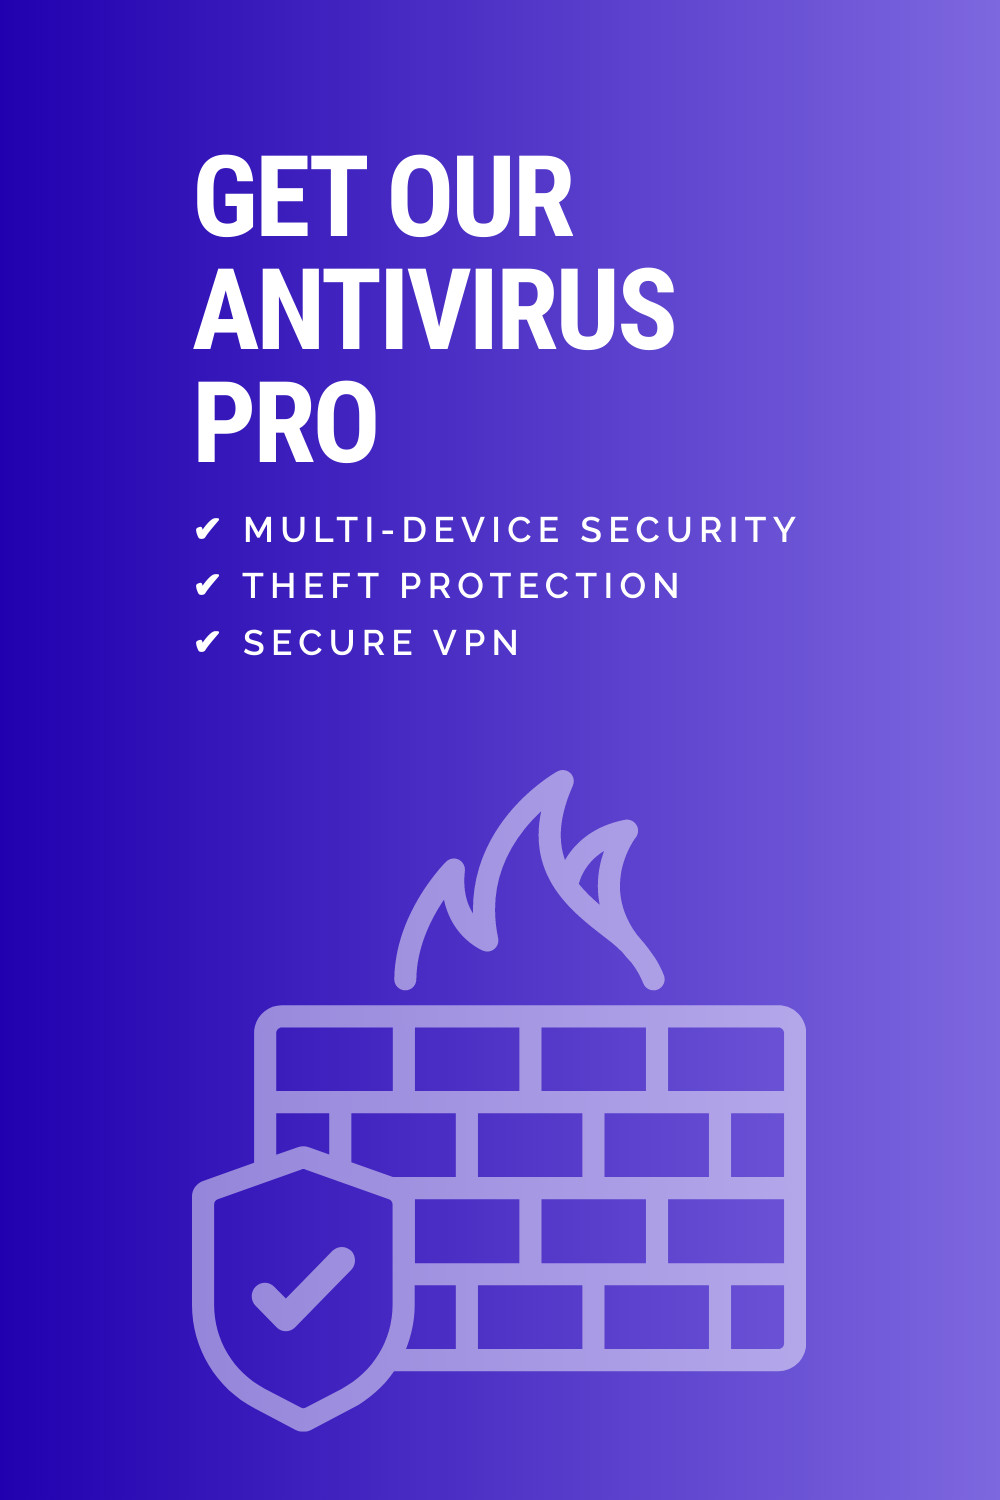 Antivirus Pro Firewall and Security Inline Rectangle 300x250